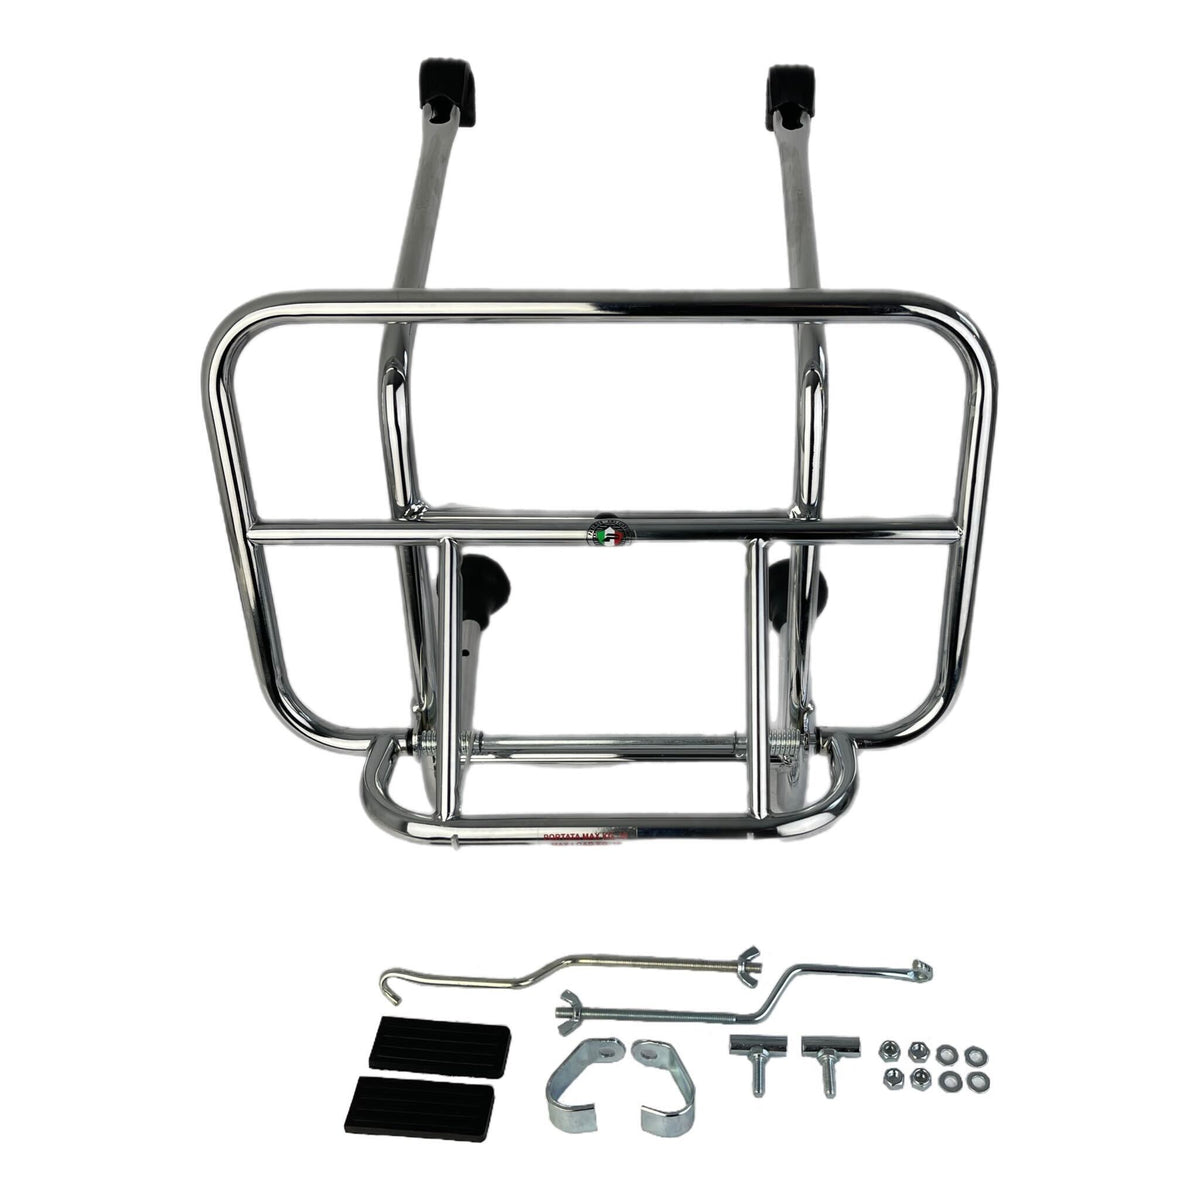 Scomadi Royal Alloy Chrome Front Carrier Deep Type - Cuppini Chrome